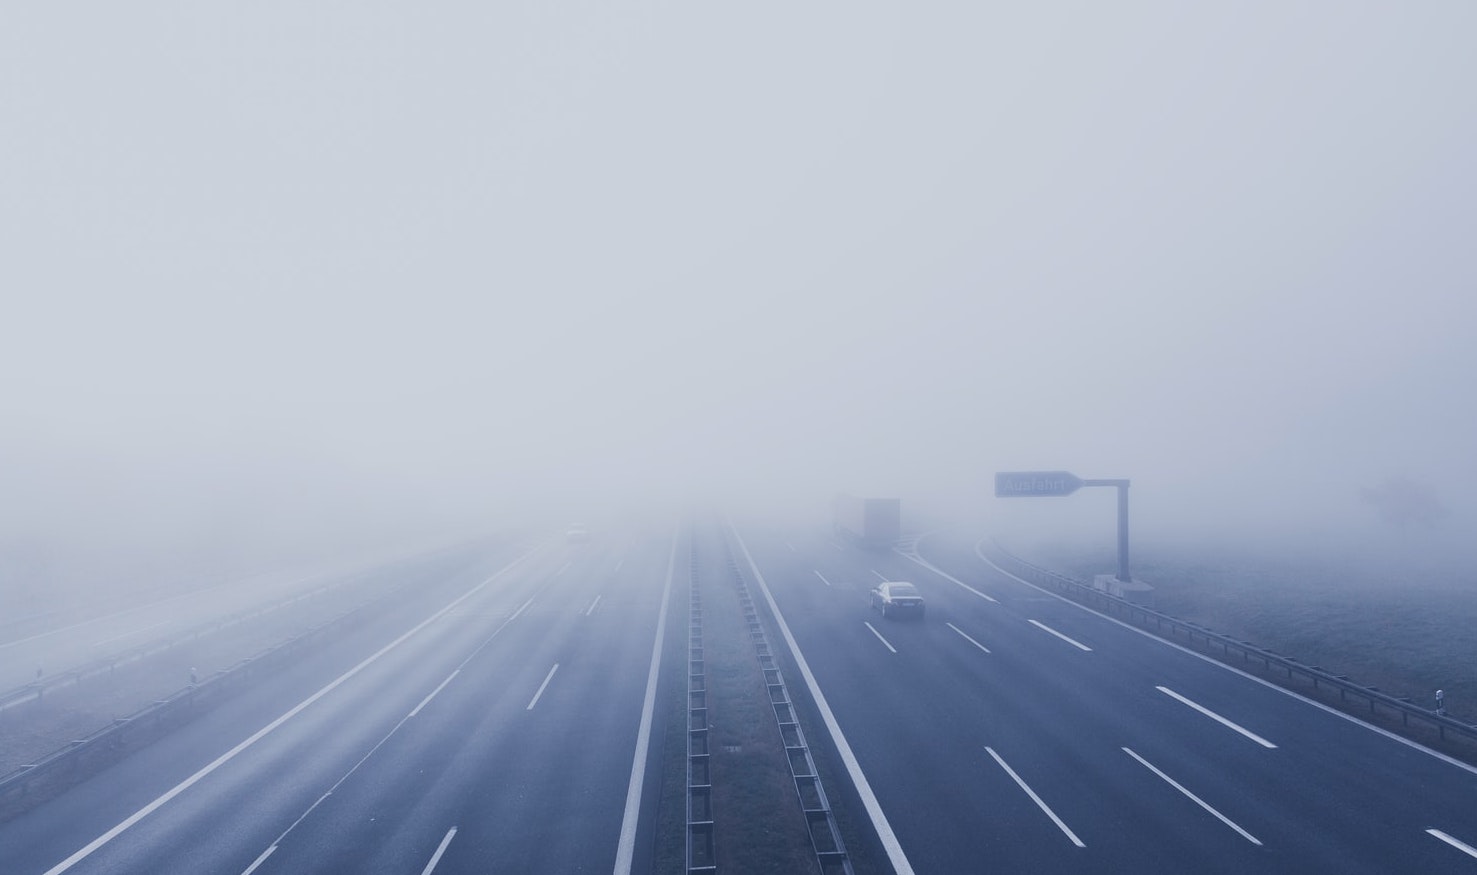 Motorway with poor visibility due to fog